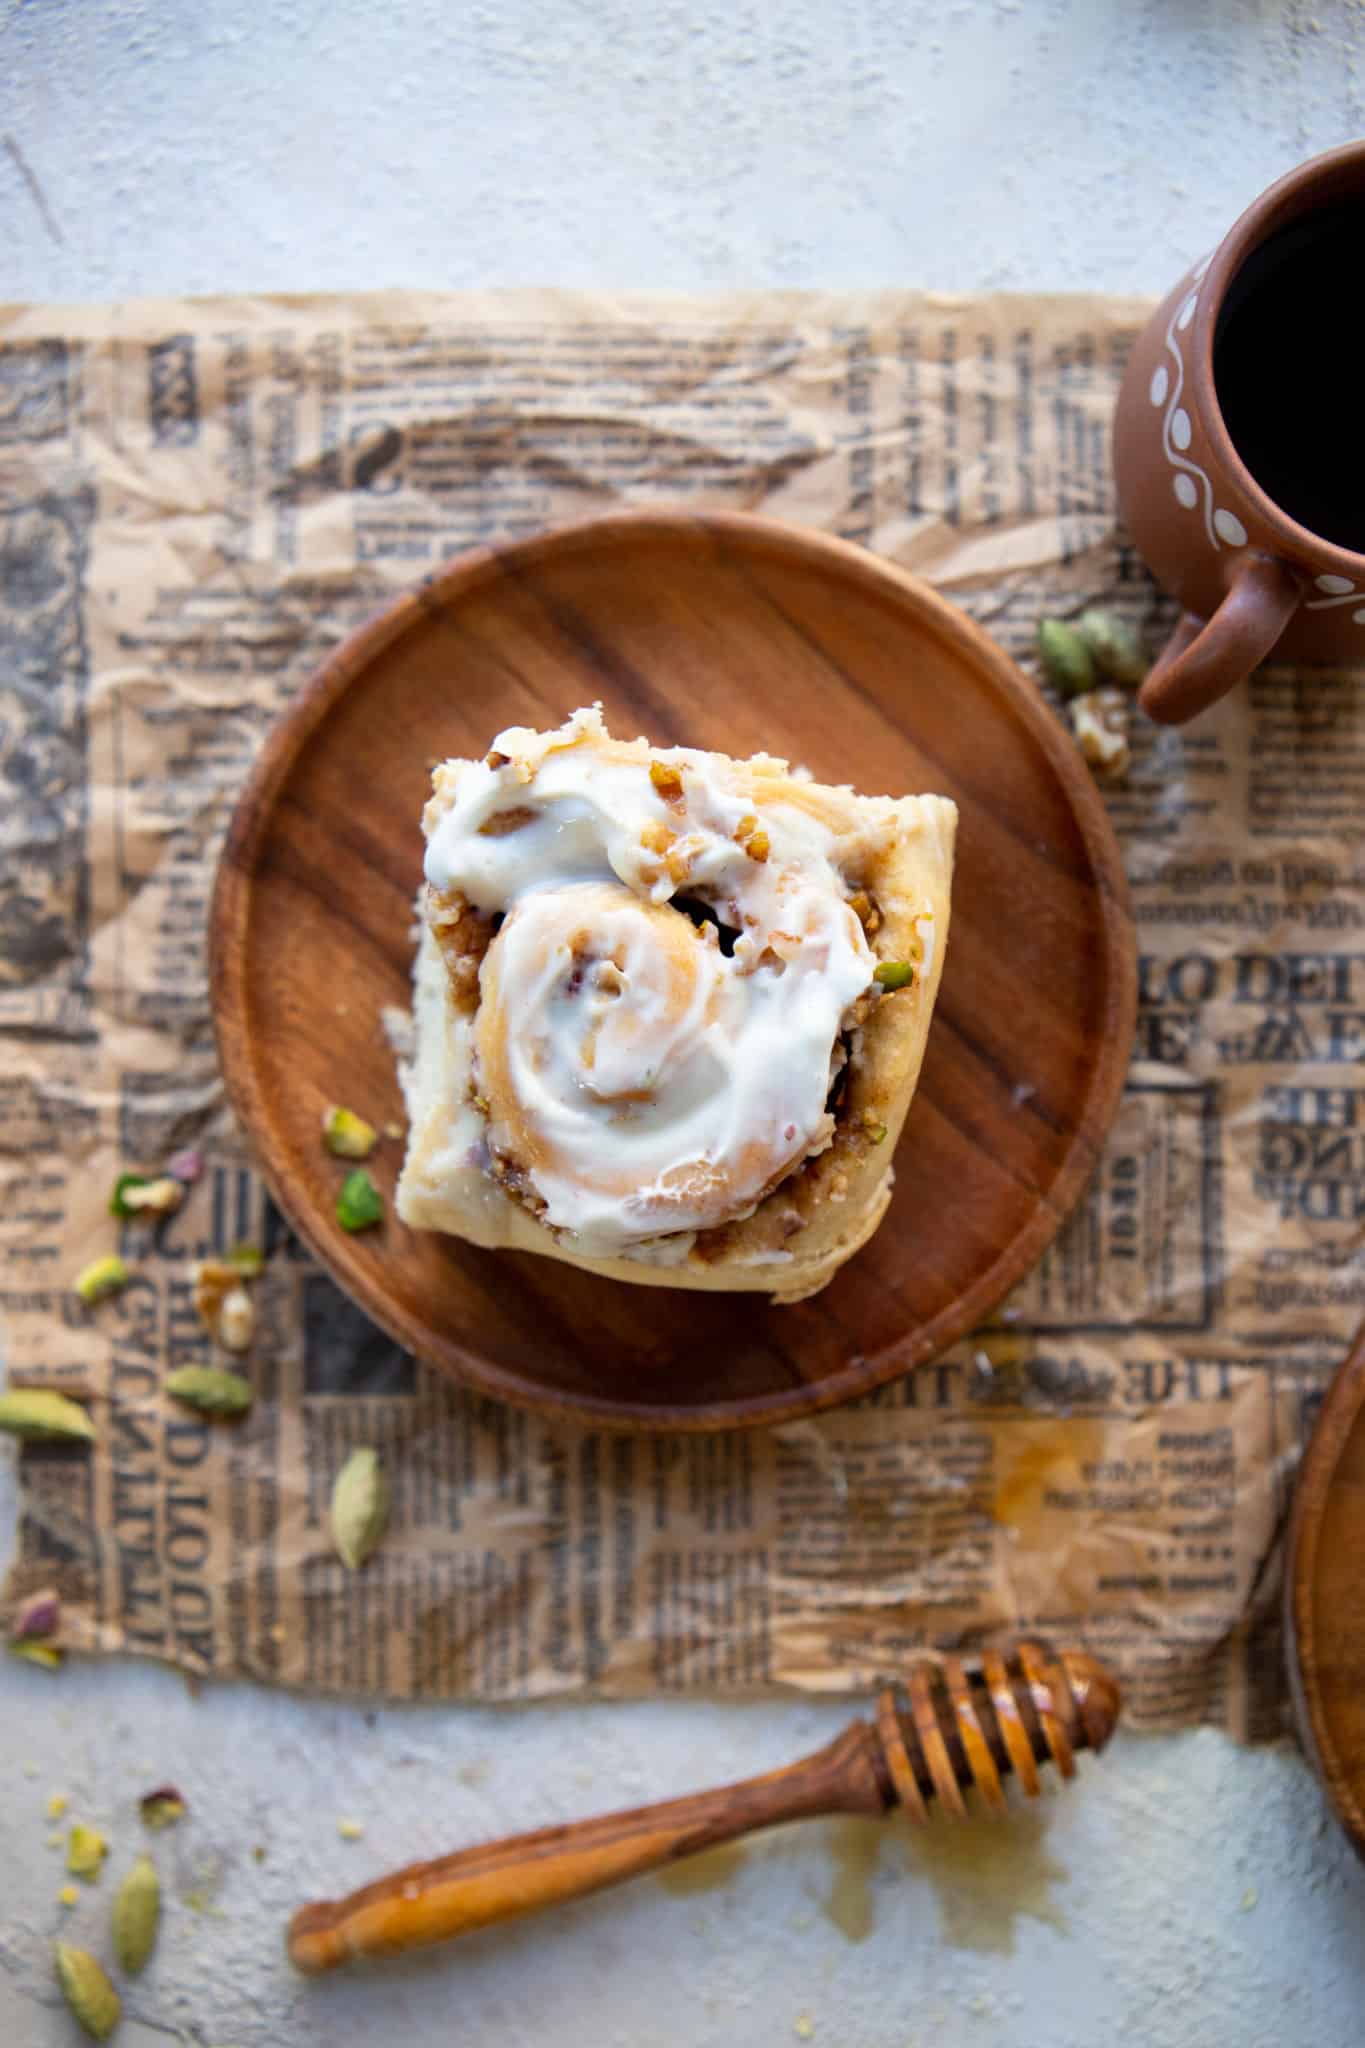 A top-down view of a cinnamon roll inspired by baklava.